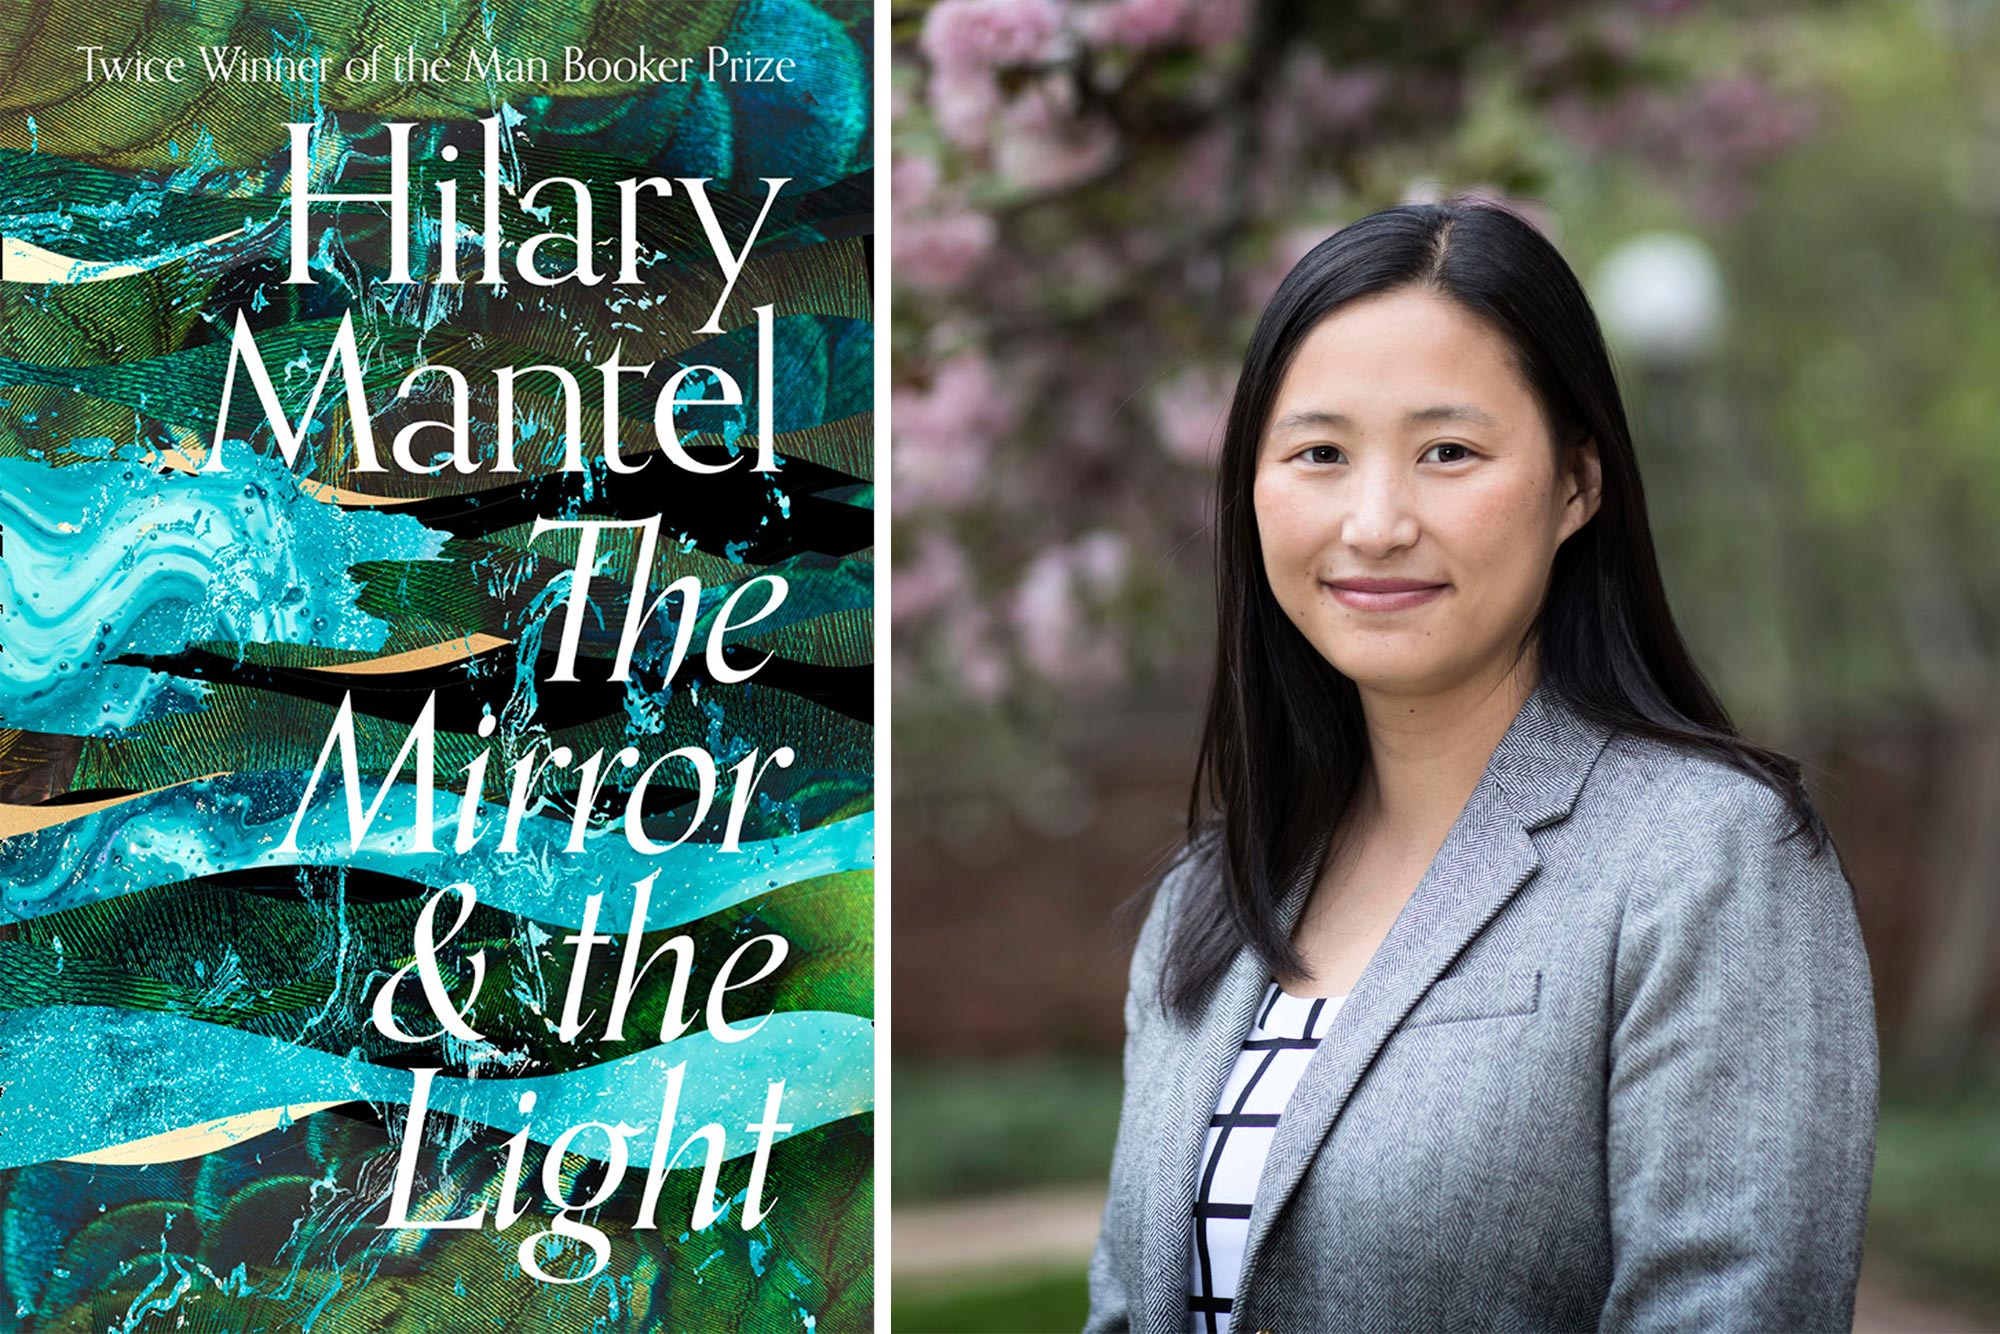 Left: Book cover that reads, Hilary Mantel the mirror & the light  Right: Headshot: Gabrielle Adams